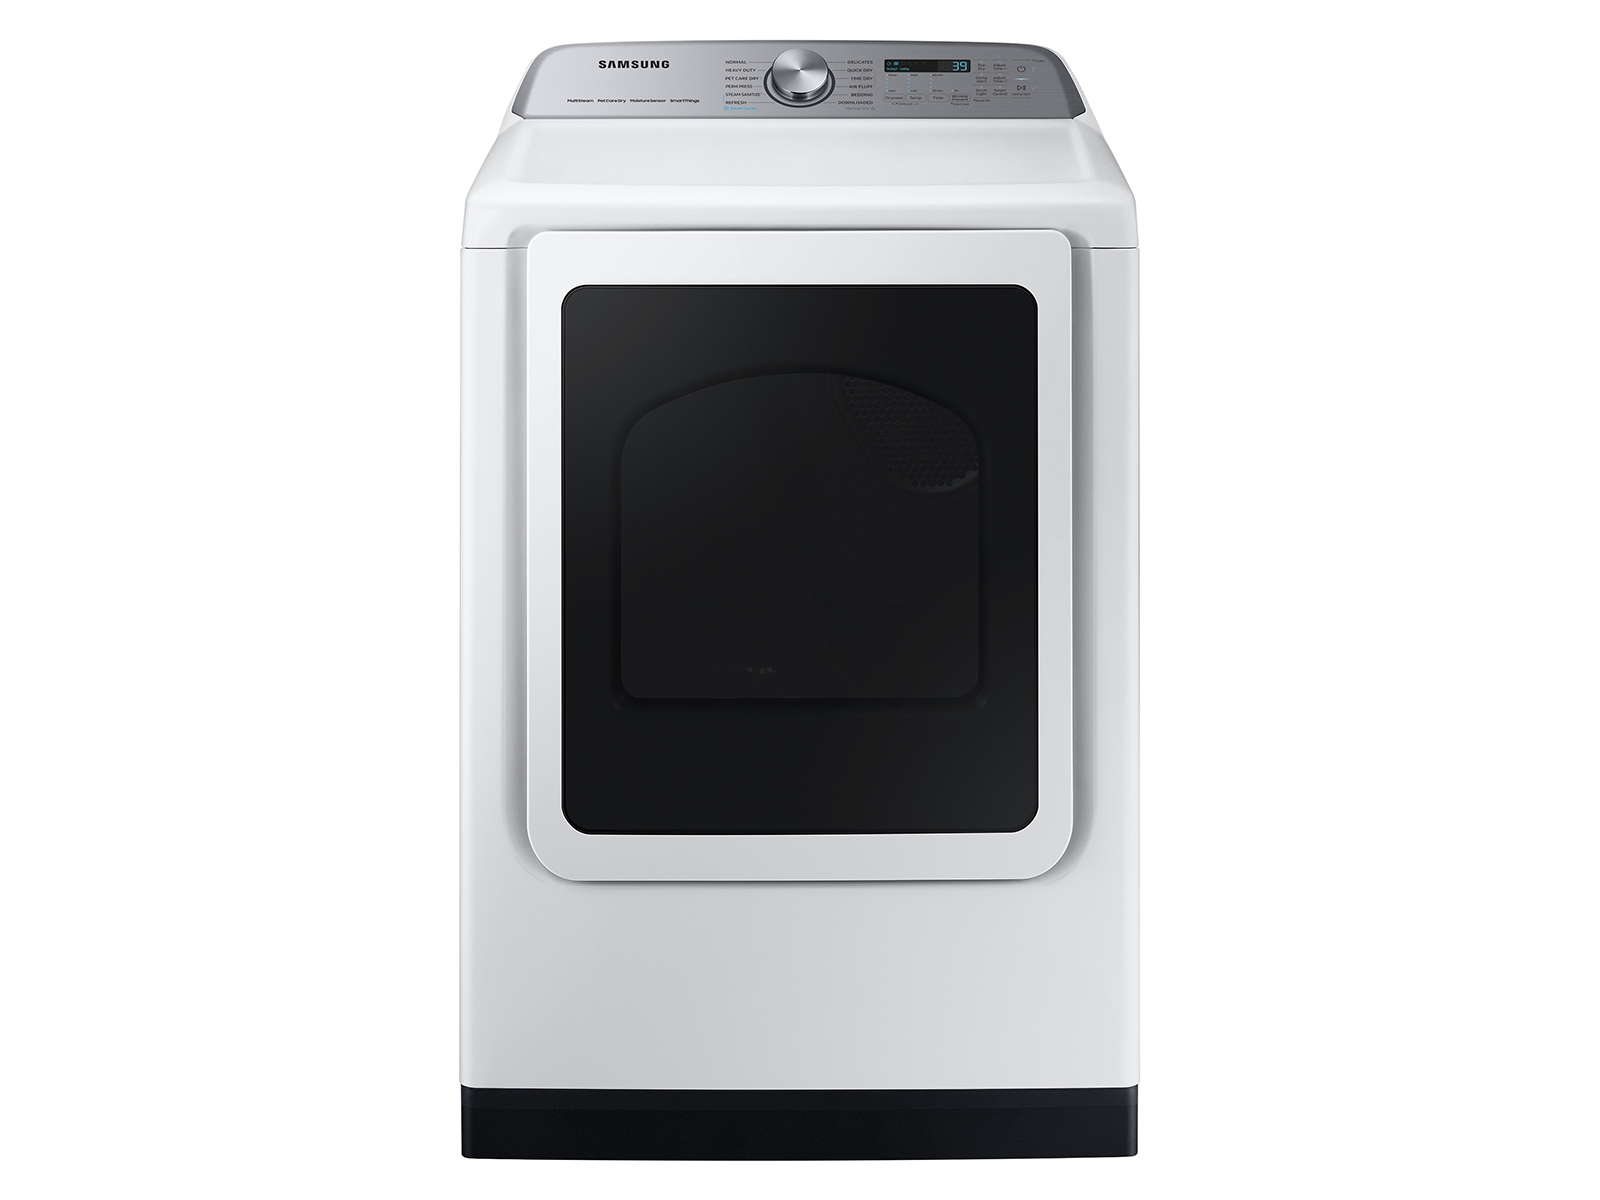 Photos - Tumble Dryer Samsung 7.4 cu. ft. Smart Gas Dryer with Pet Care Dry and Steam Sanitize+ 